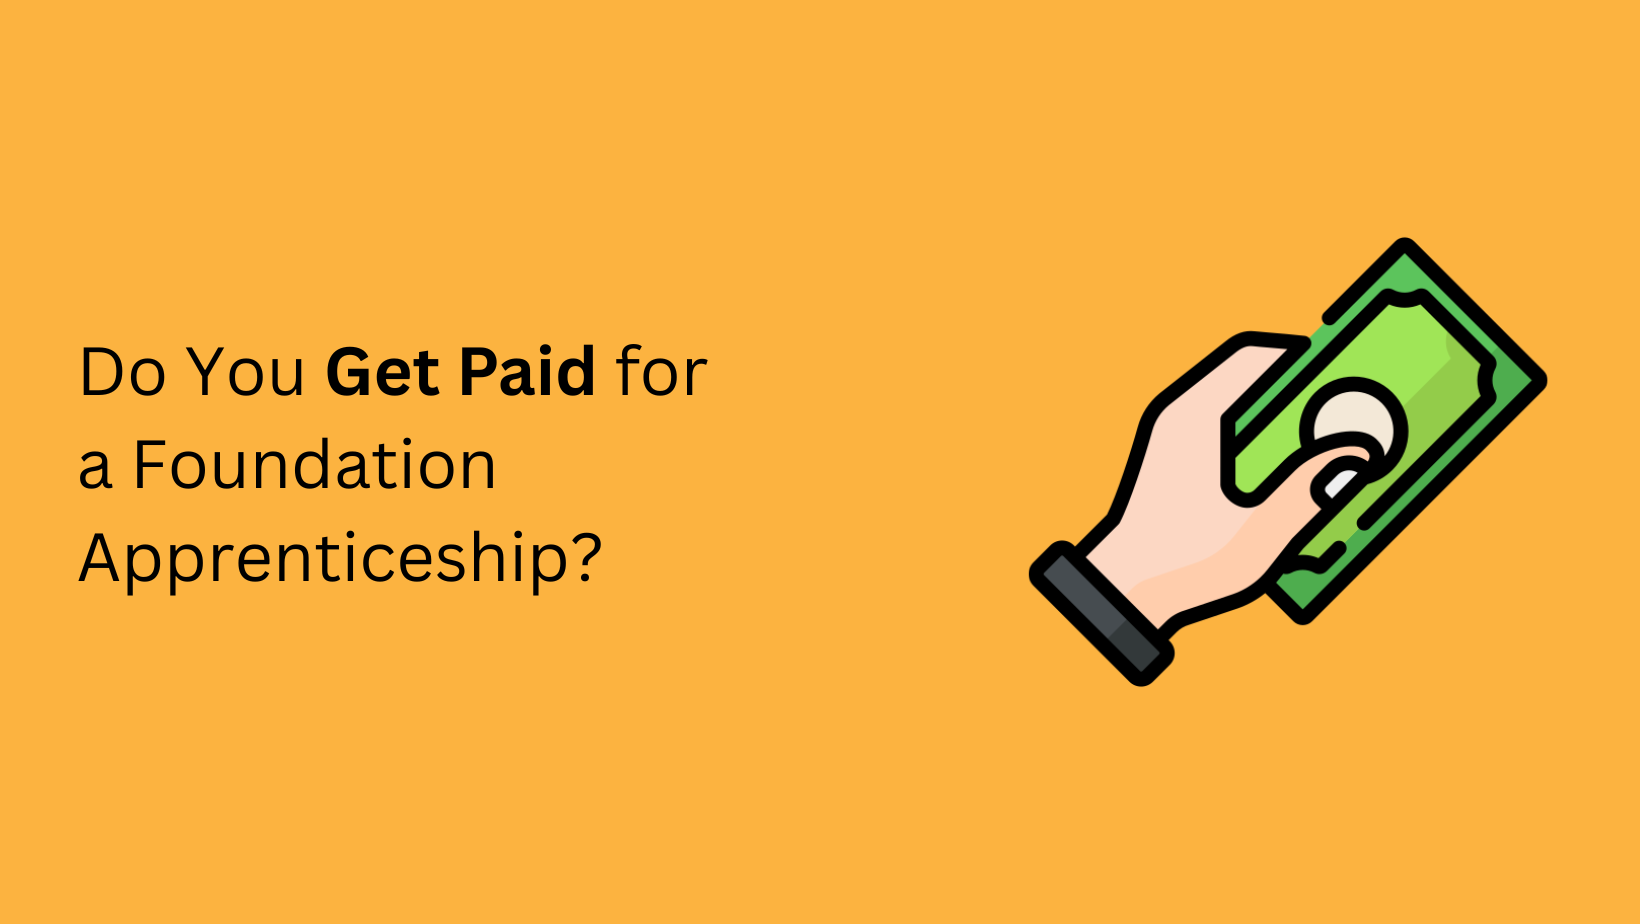 Do You Get Paid for Foundation Apprenticeships